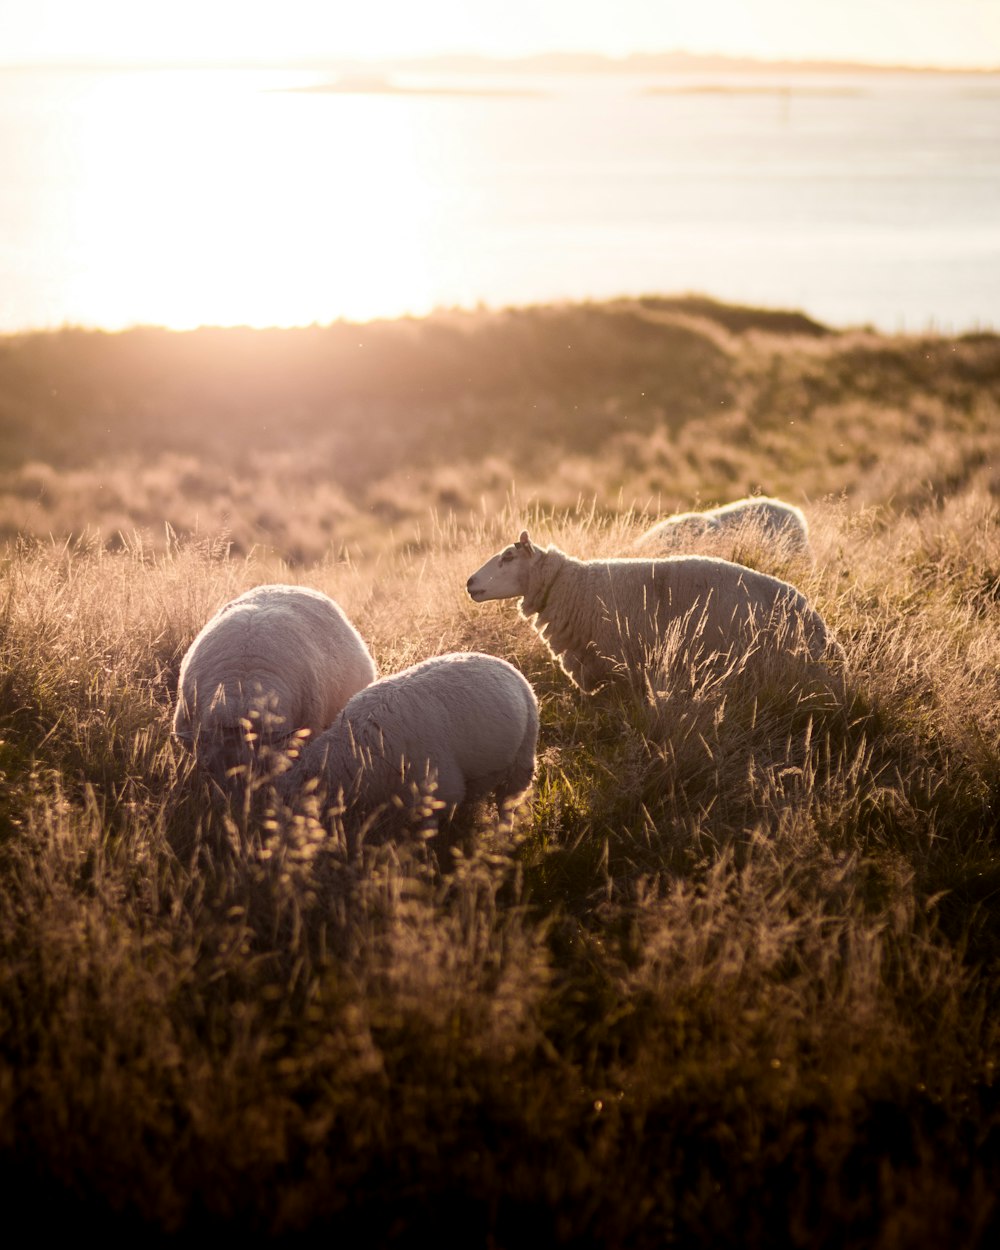 photography of sheep eating a grass during daytime